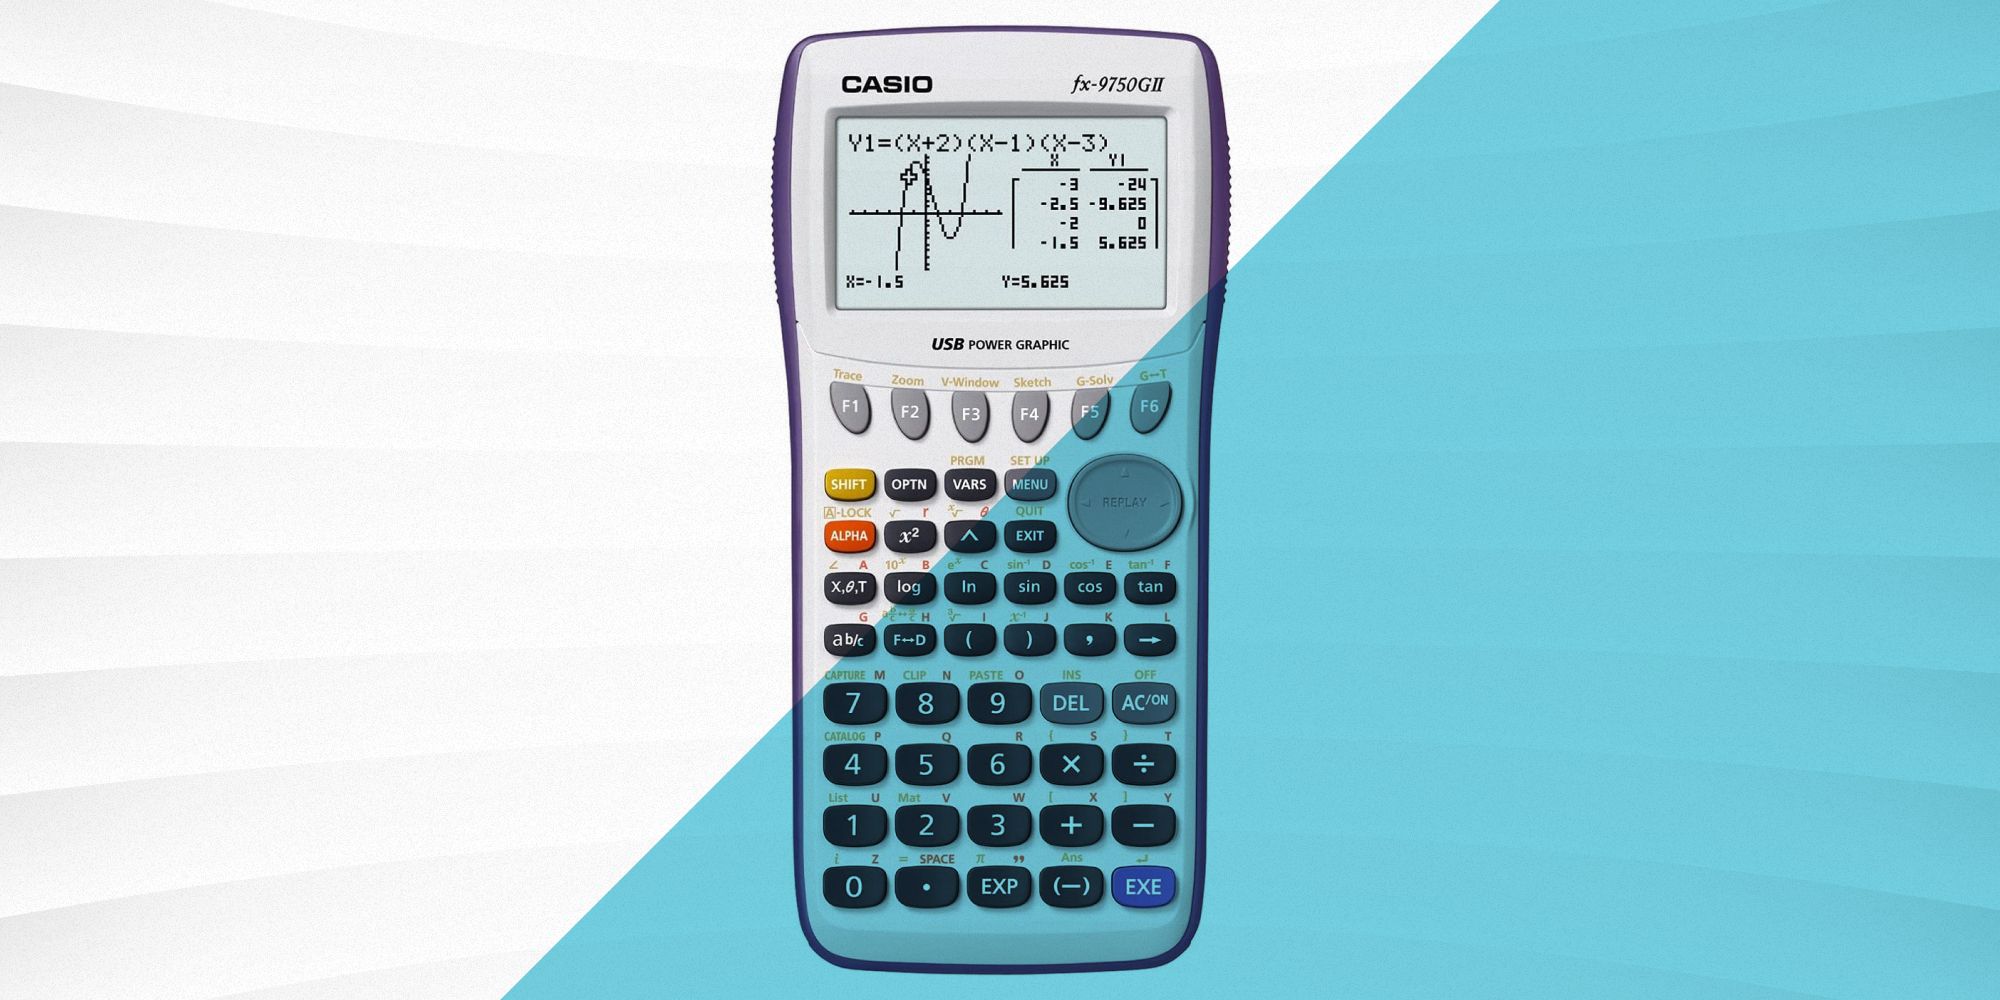  NumWorks Graphing Calculator : Office Products